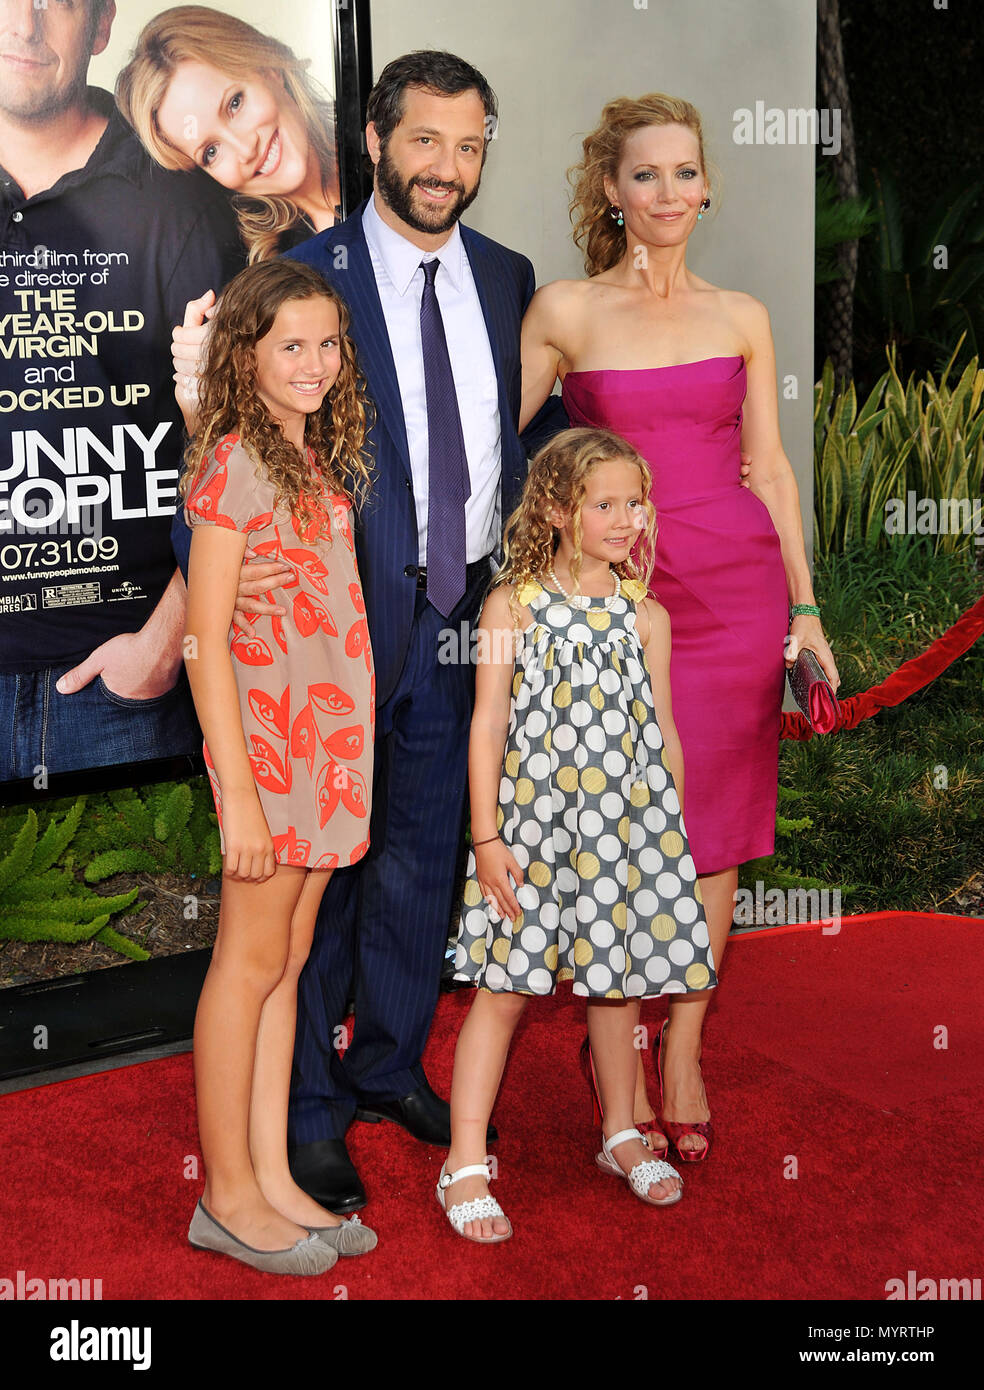 Maude And Iris Apatow Join Their Mom Leslie Mann For The Louis